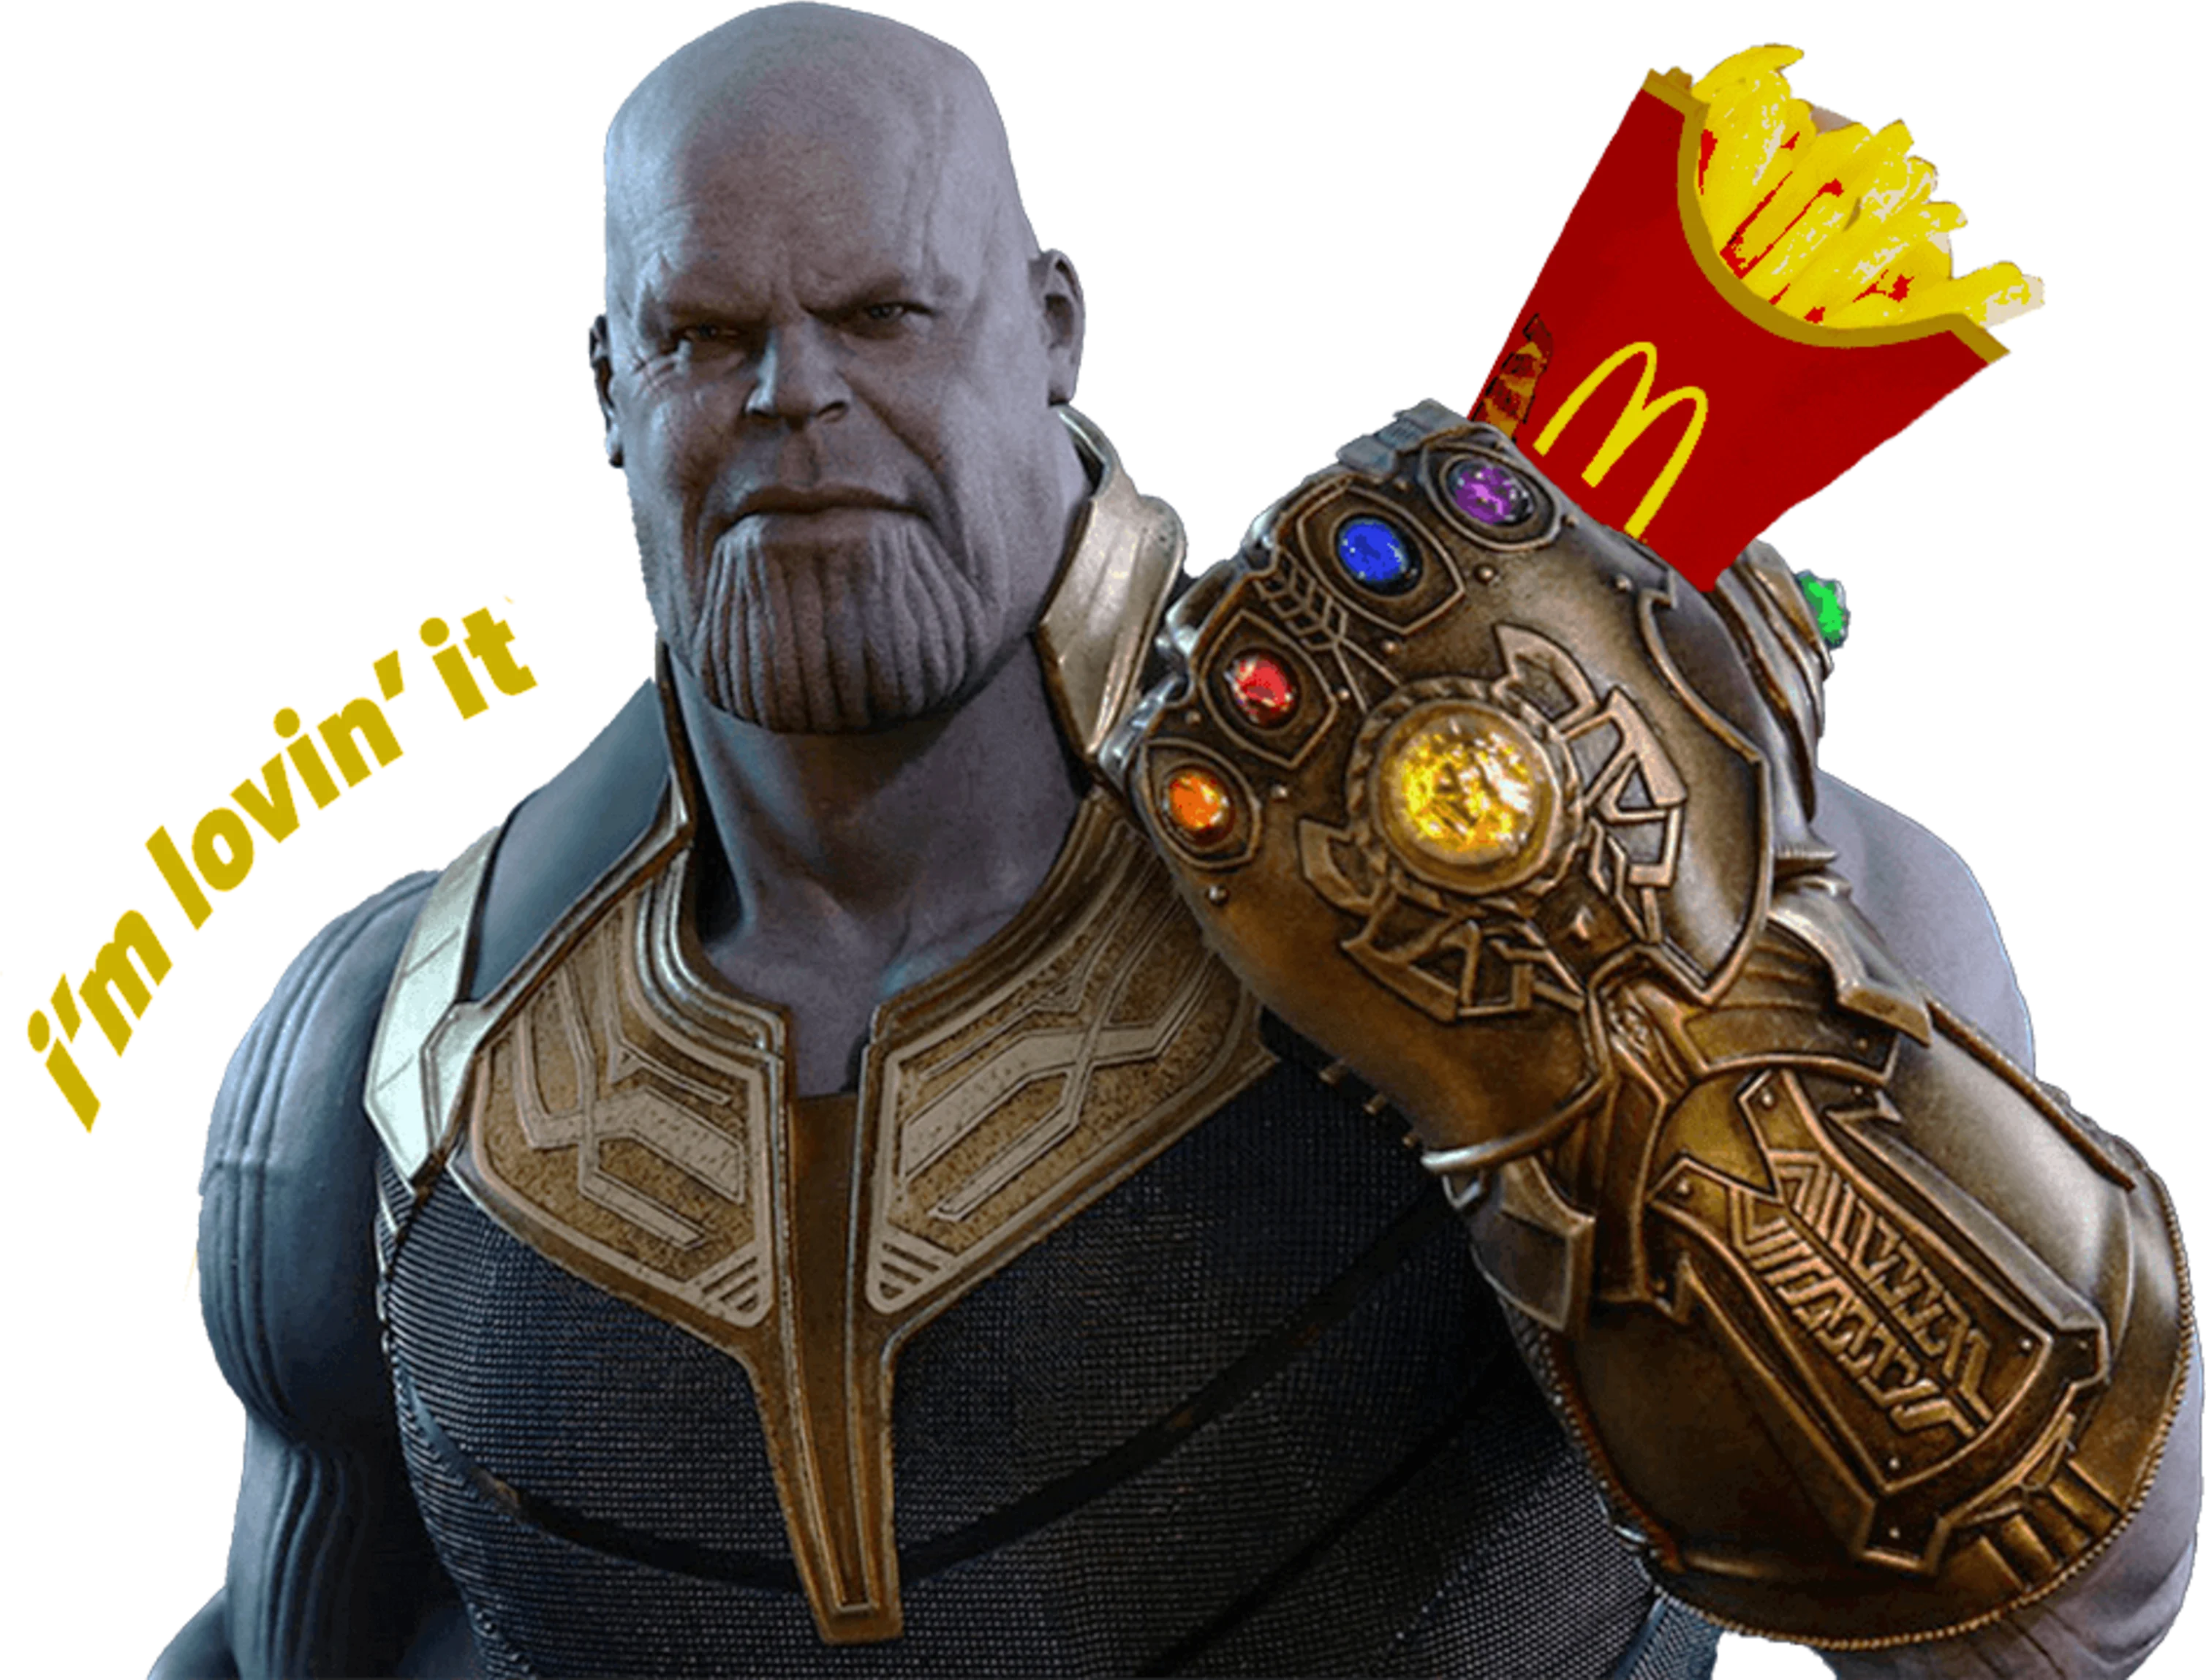 How the MCU became the McDonald's of cinema